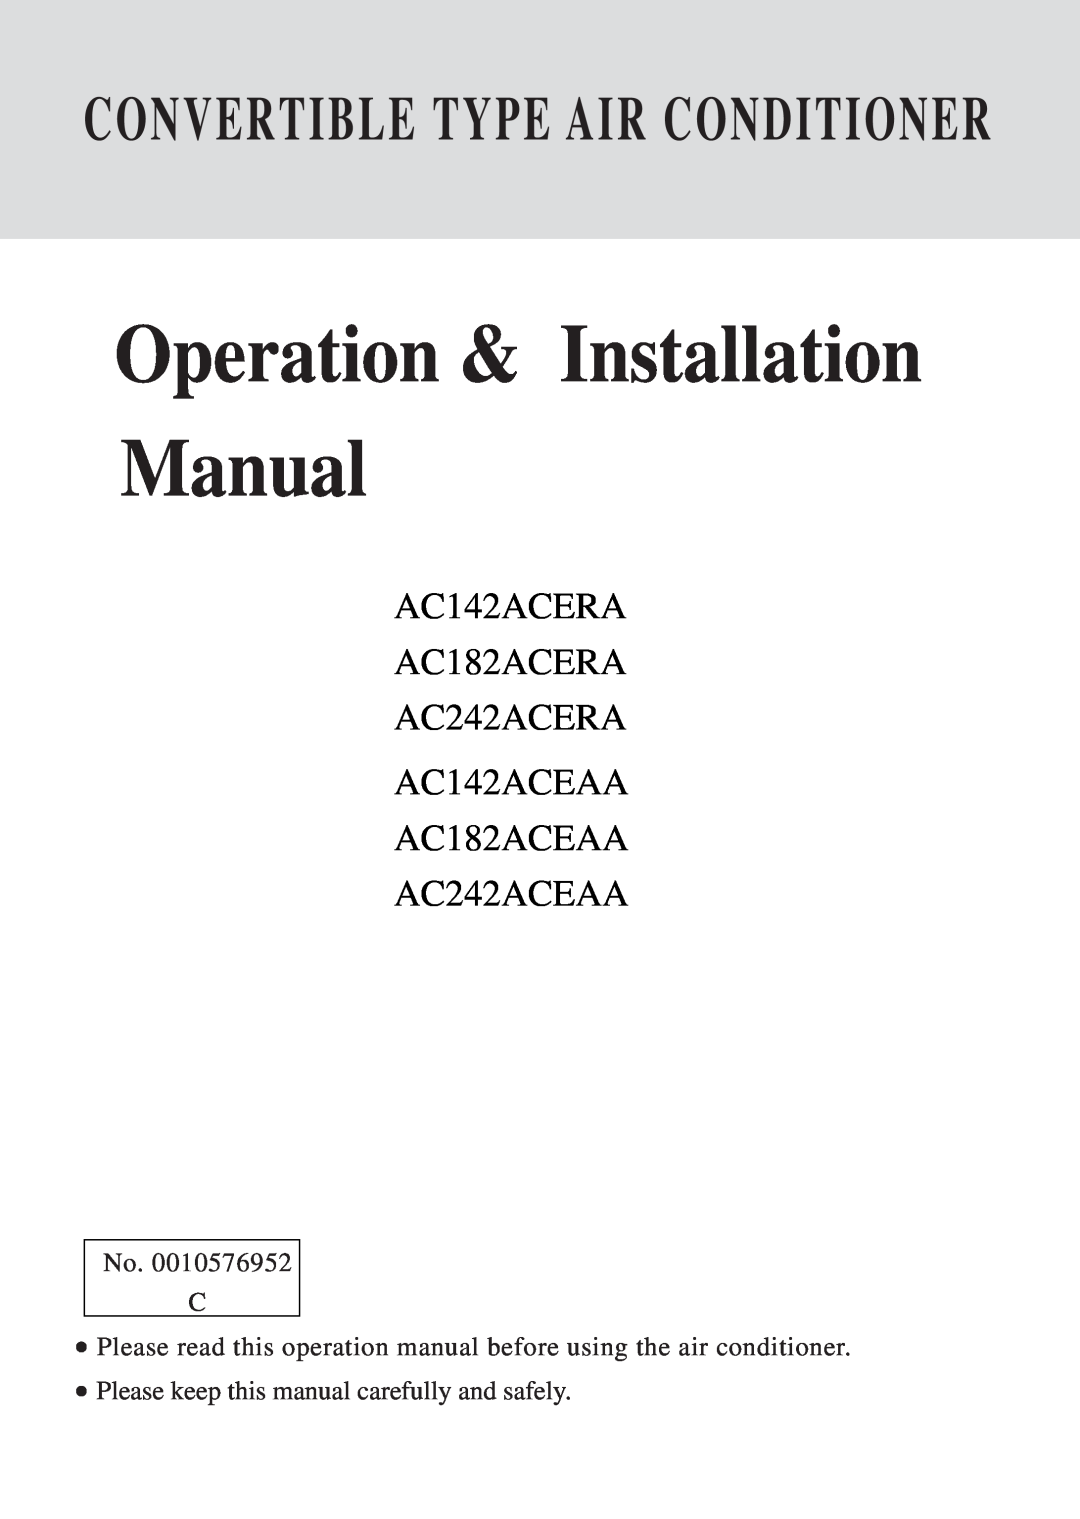 Haier AC142ACERA installation manual No. C, Please keep this manual carefully and safely, Operation & Installation Manual 